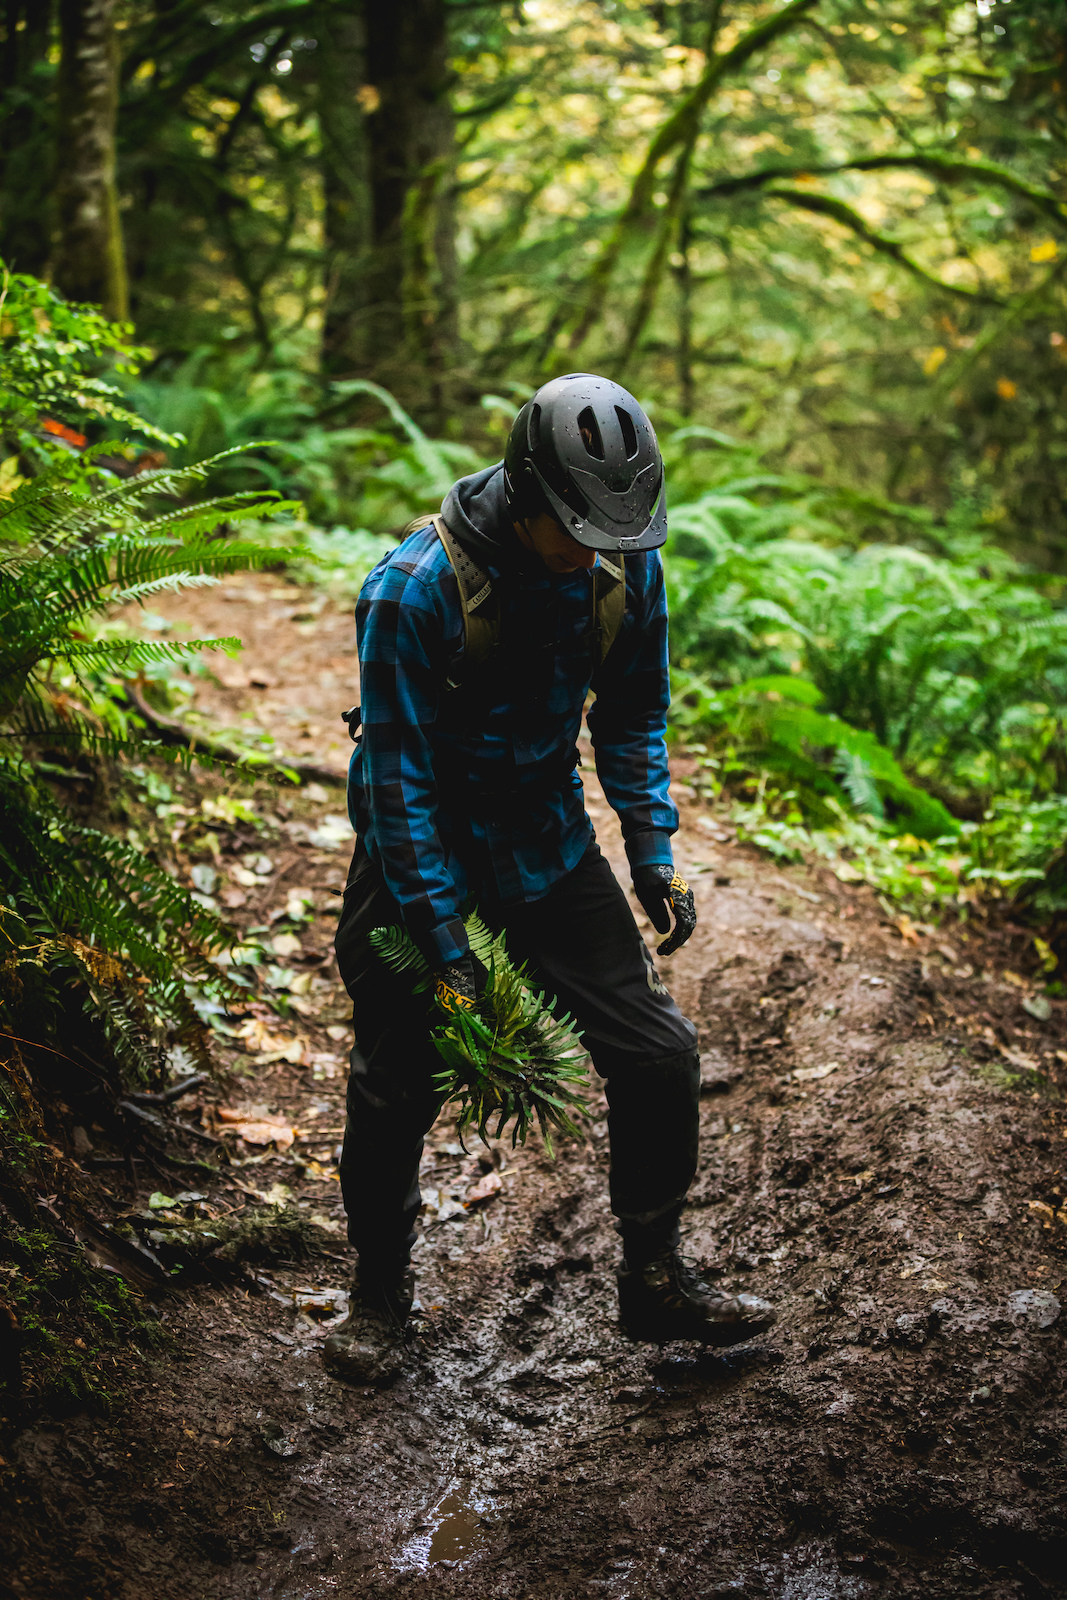 Cody Kelley flew out to the PNW to join us in filming his second PNW Components video. The second day of filming went according to plan and culminated with a meet and greet where local riders were able to ask Cody about his career and lifestyle. Photo by Trevor Lyden